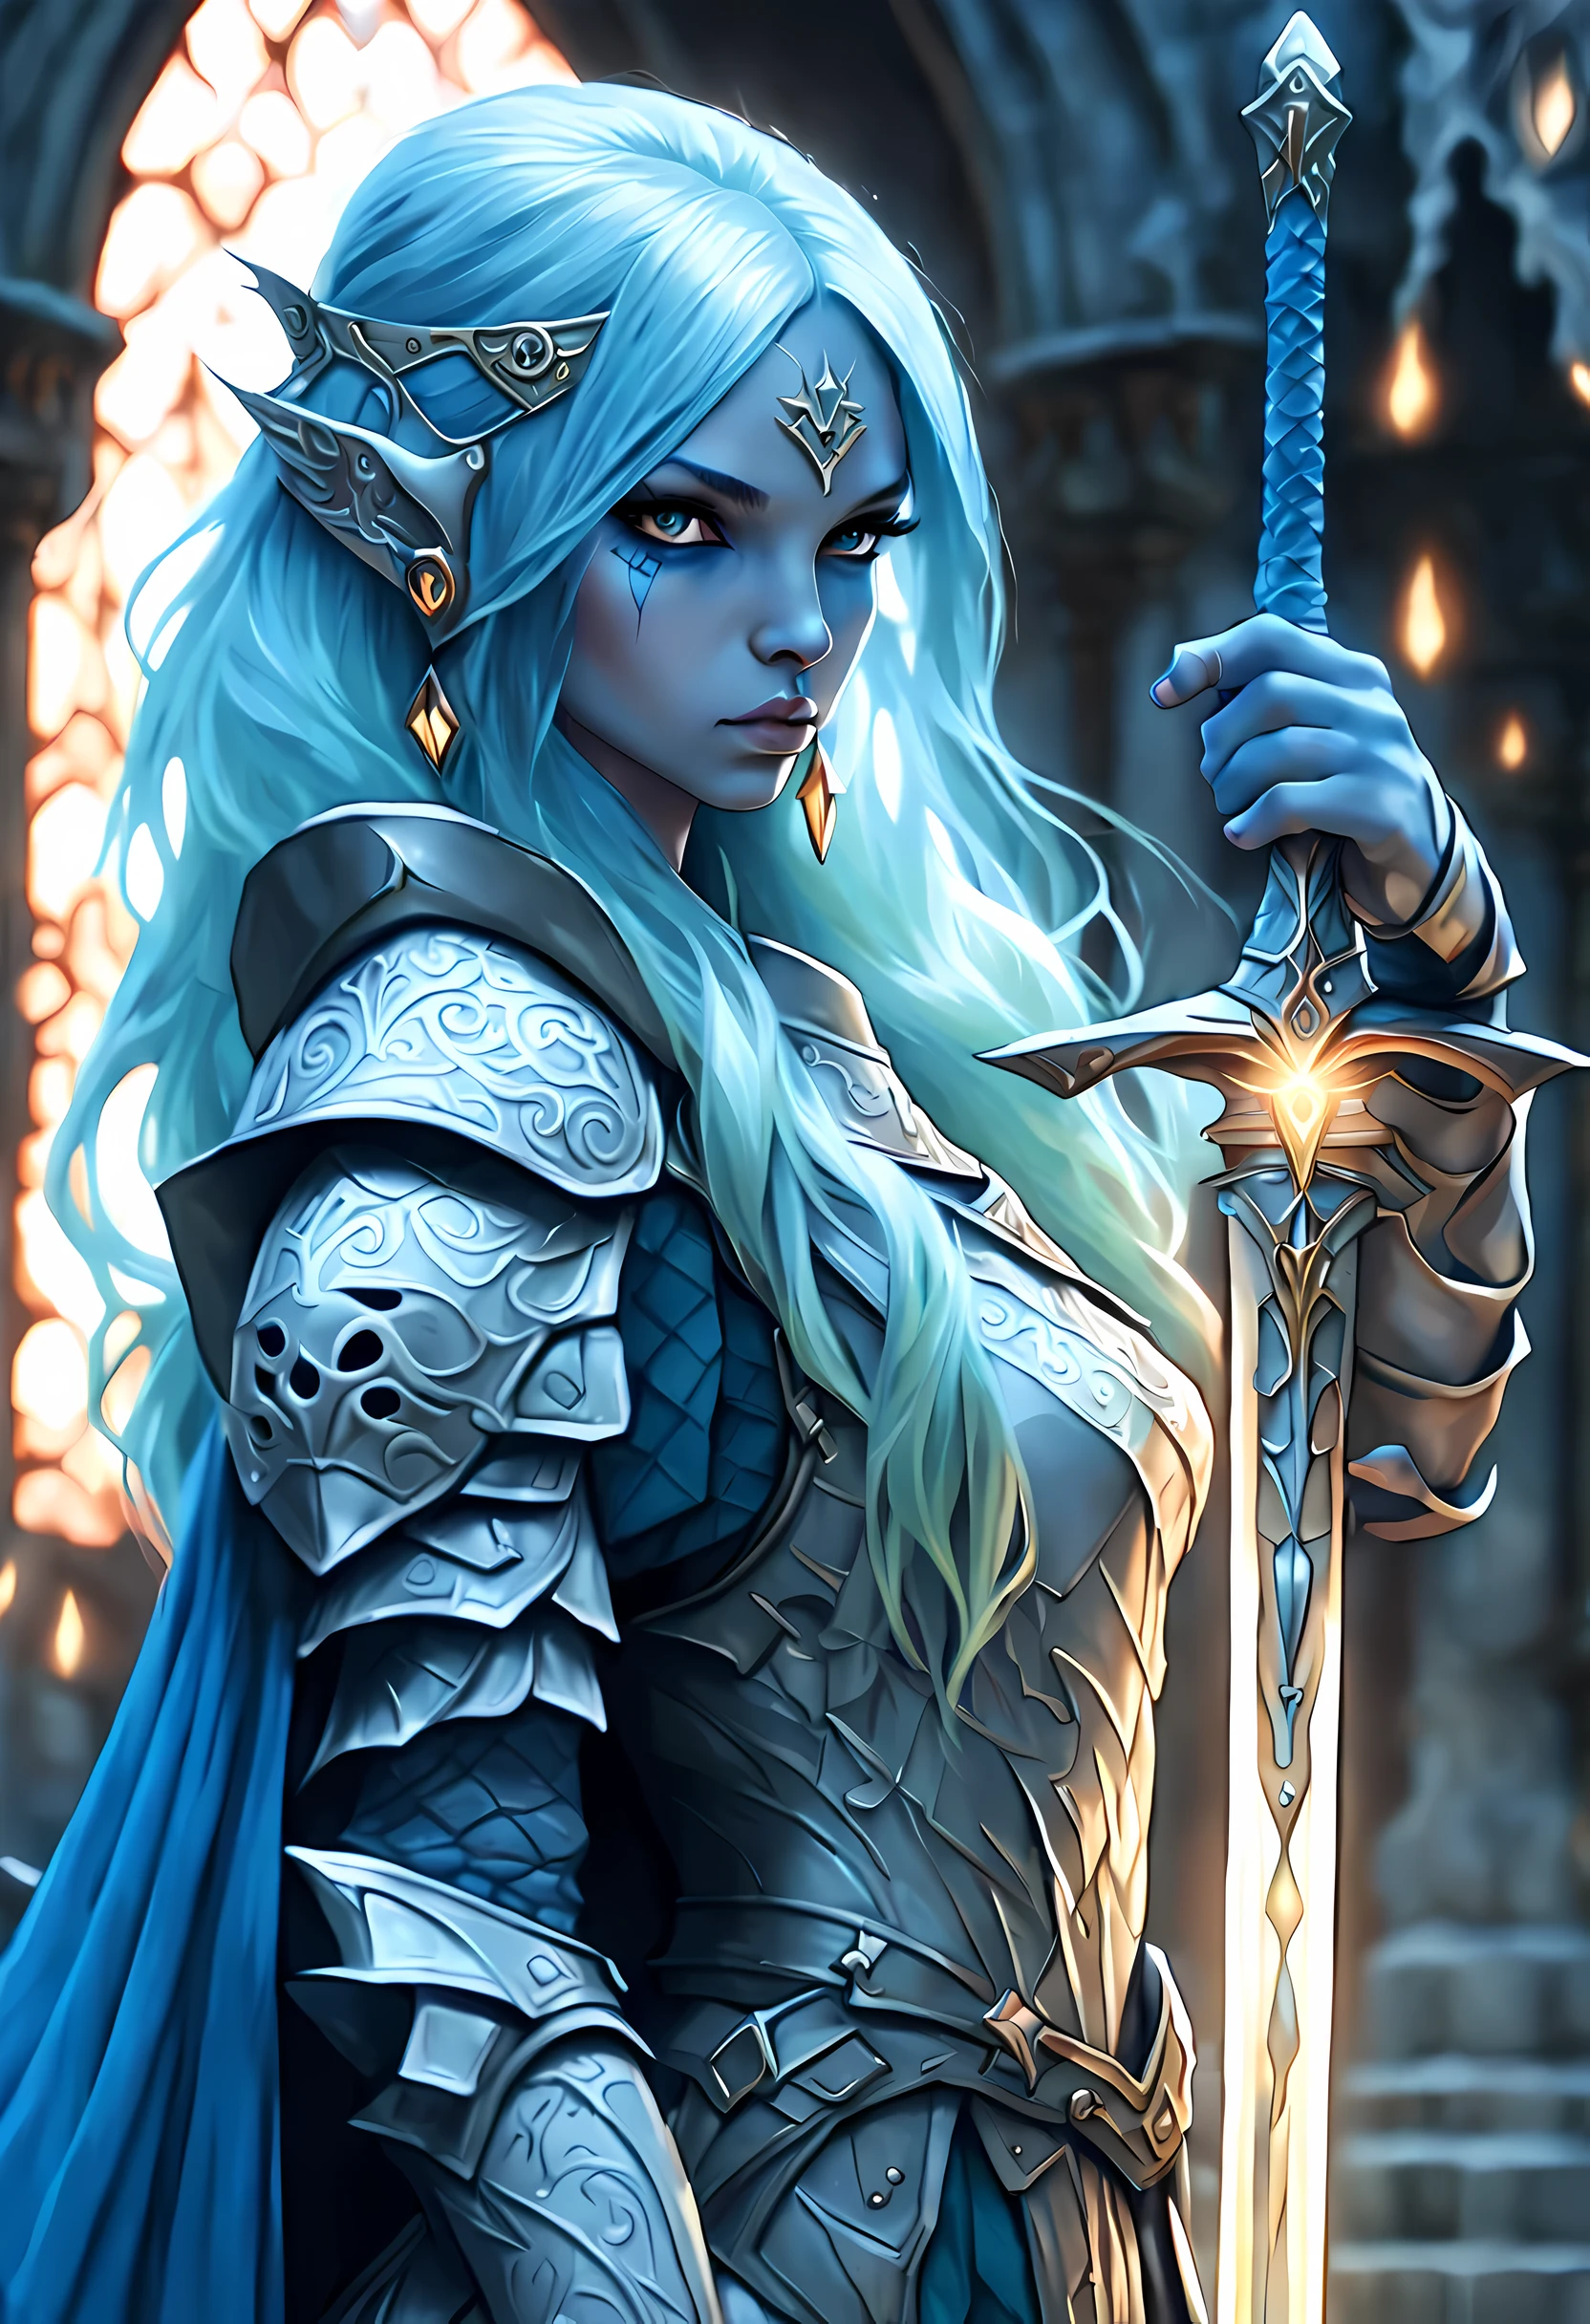 fantasy art, dnd art, RPG art, portrait, (masterpiece: 1.4) a (portrait: 1.3) intense details, highly detailed, photorealistic, best quality, highres, portrait a female (fantasy art, Masterpiece, best quality: 1.3) ((blue skin: 1.5)), intense details facial details, exquisite beauty, (fantasy art, Masterpiece, best quality) cleric, (blue: 1.3) skinned female, white hair, long hair, (hair hides ears: 1.5), (green: 1.3) eye, fantasy art, Masterpiece, best quality) armed a fiery sword red fire, wearing heavy (white: 1.3) half plate mail armor, wearing high heeled laced boots, wearing an(orange :1.3) cloak, wearing glowing holy symbol GlowingRunes_yellow, within fantasy temple background, reflection light, high details, best quality, 16k, [ultra detailed], masterpiece, best quality, (extremely detailed), close up, photorealistic, RAW, fantasy art, dnd art, fantasy art, realistic art,((best quality)), ((masterpiece)), (detailed), perfect face,